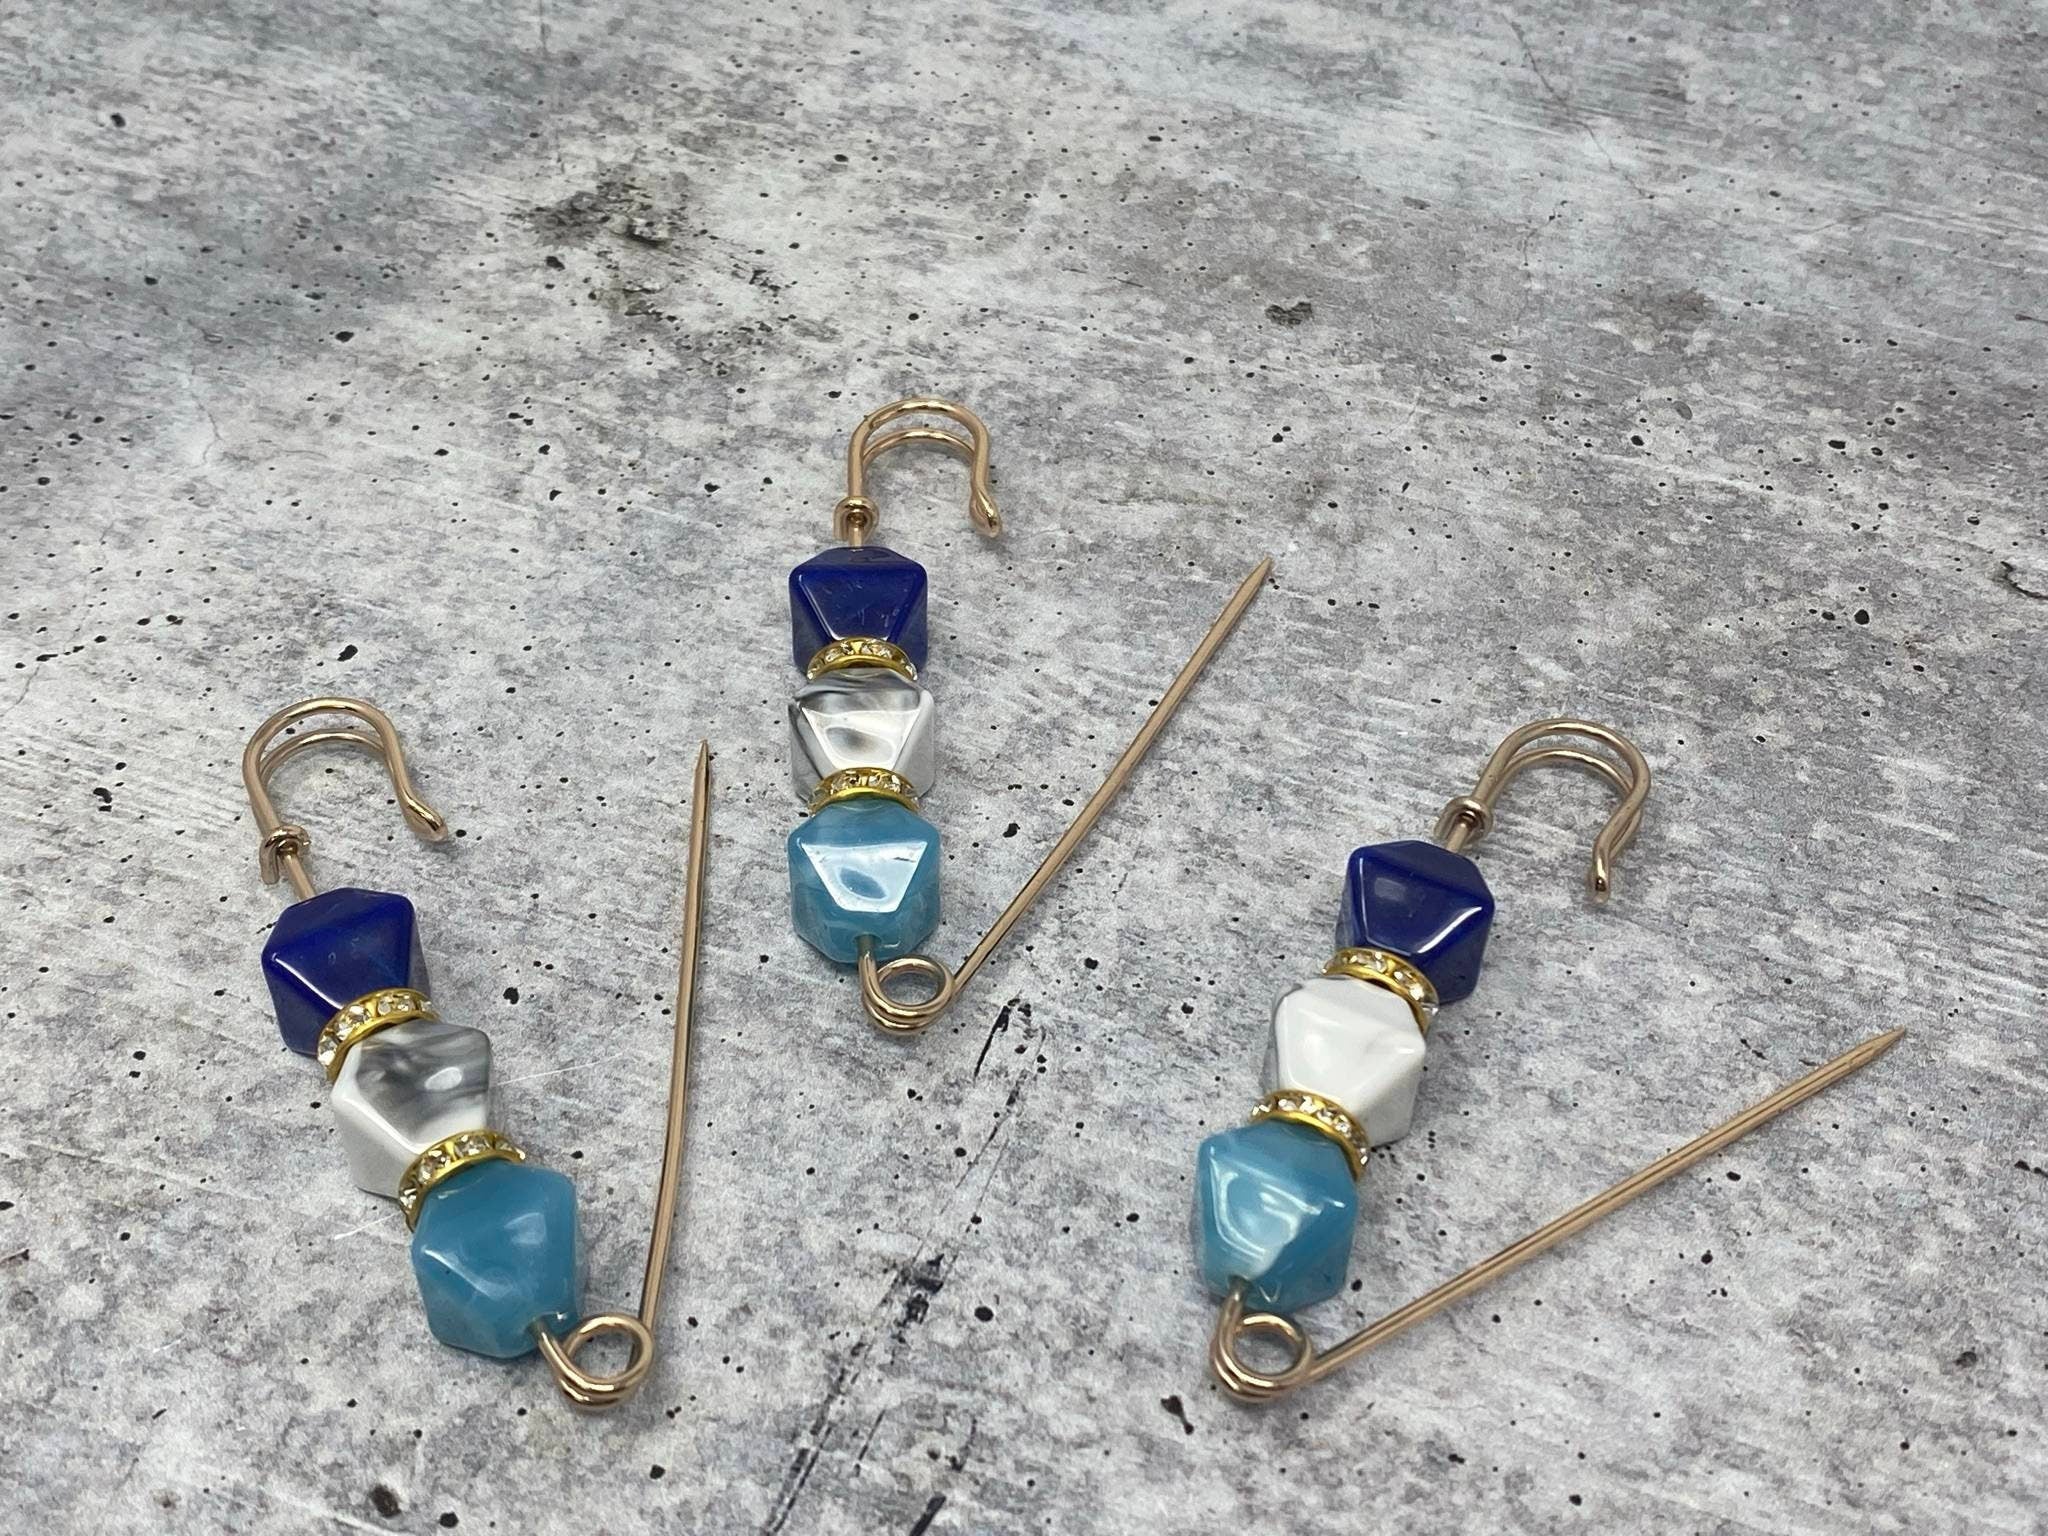 6-pc set, Shades of BLUE Resin Beads w/Gold Bling, Safety Pin Brooches for Clothing Safety Pins for Crafting, DIY Tools, Size 3", Alloy Pins